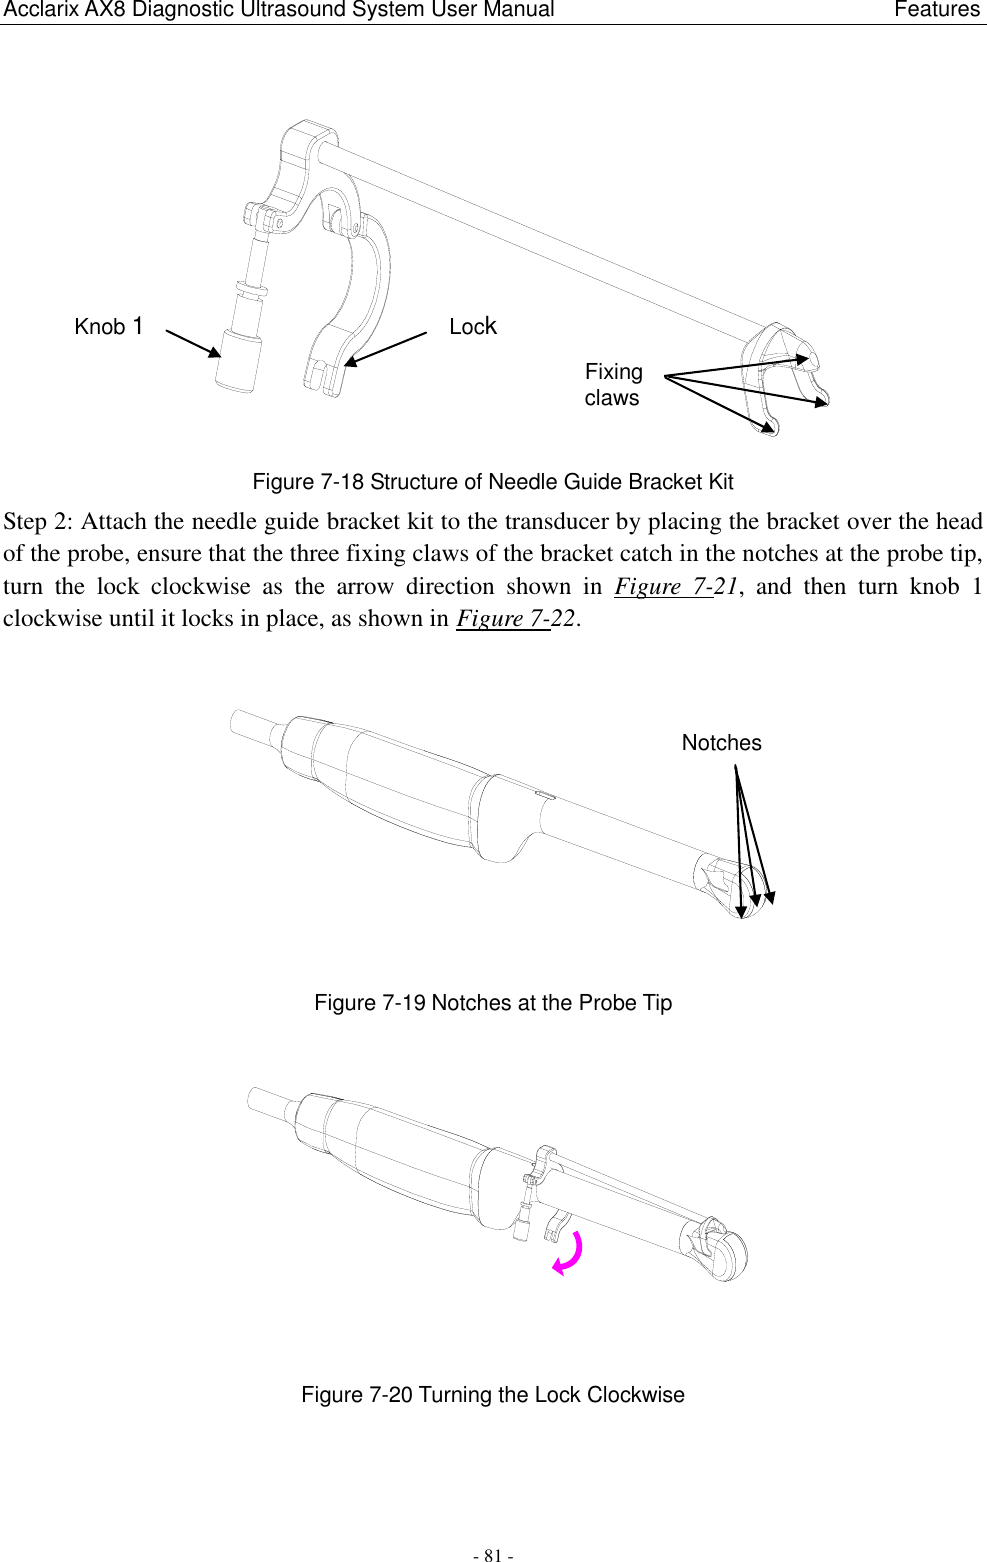 Acclarix AX8 Diagnostic Ultrasound System User Manual                                                              Features - 81 -  Figure 7-18 Structure of Needle Guide Bracket Kit   Step 2: Attach the needle guide bracket kit to the transducer by placing the bracket over the head of the probe, ensure that the three fixing claws of the bracket catch in the notches at the probe tip, turn  the  lock  clockwise  as  the  arrow  direction  shown  in  Figure  7-21,  and  then  turn  knob  1 clockwise until it locks in place, as shown in Figure 7-22.  Figure 7-19 Notches at the Probe Tip  Figure 7-20 Turning the Lock Clockwise Lock Knob 1 Fixing claws Notches 